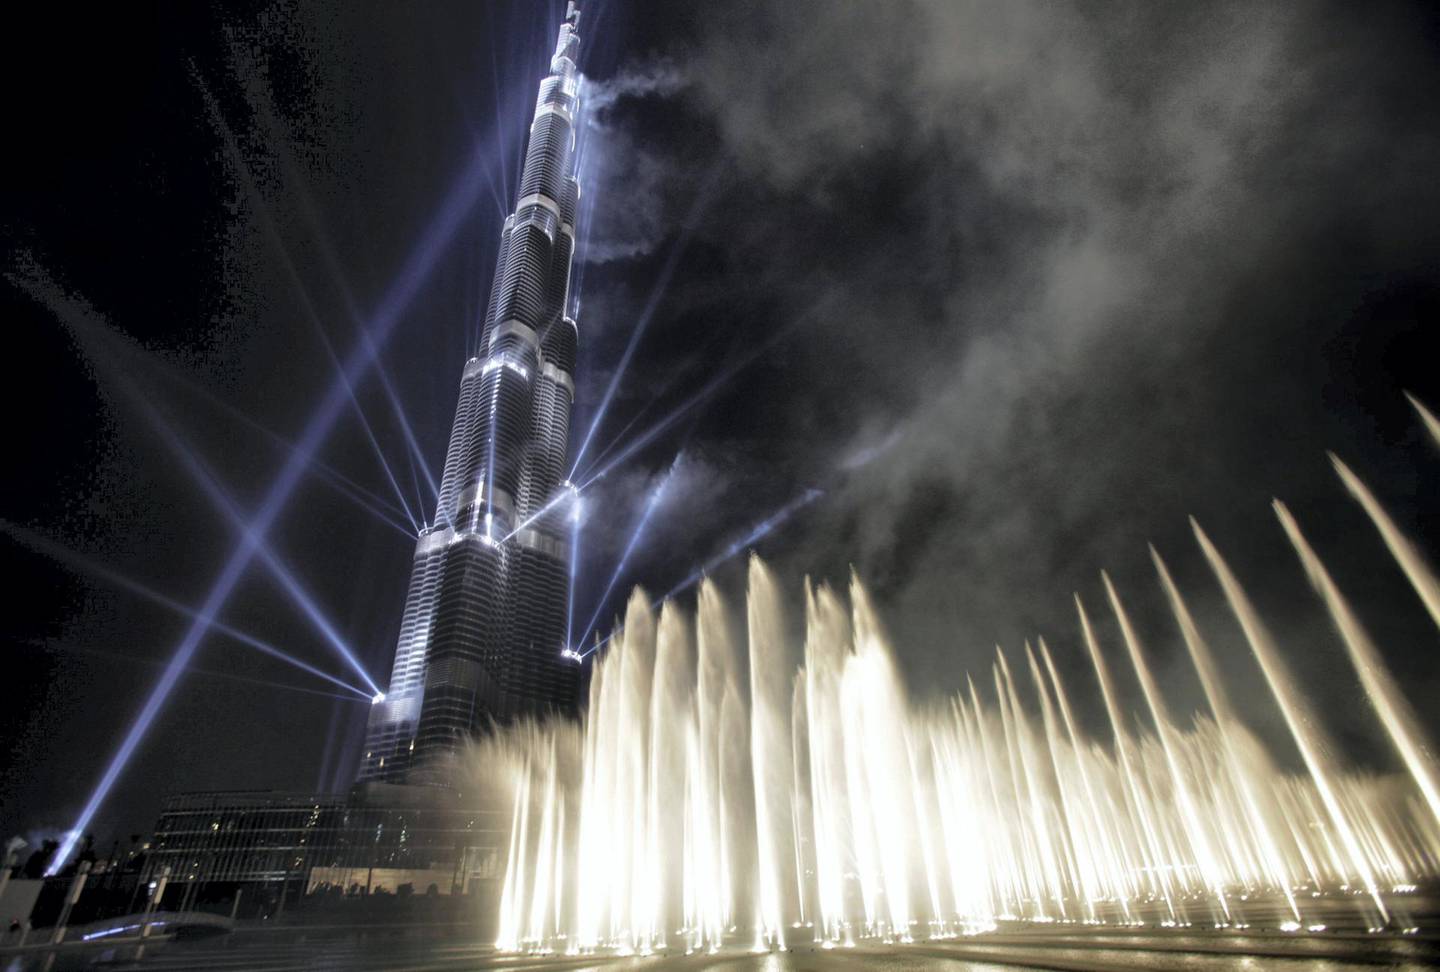 DUBAI, UNITED ARAB EMIRATES - JANUARY 04: 
Laser beams, fireworks and water fountain were displayed during the Burj Khalifa tower opening ceremony on January 4, 2010 in Dubai, United Arab Emirates. The tower, designed by Chicago architect Adrian Smith, is the tallest free-standing structure on Earth. (Photo by Kuni Takahashi/Getty Images)